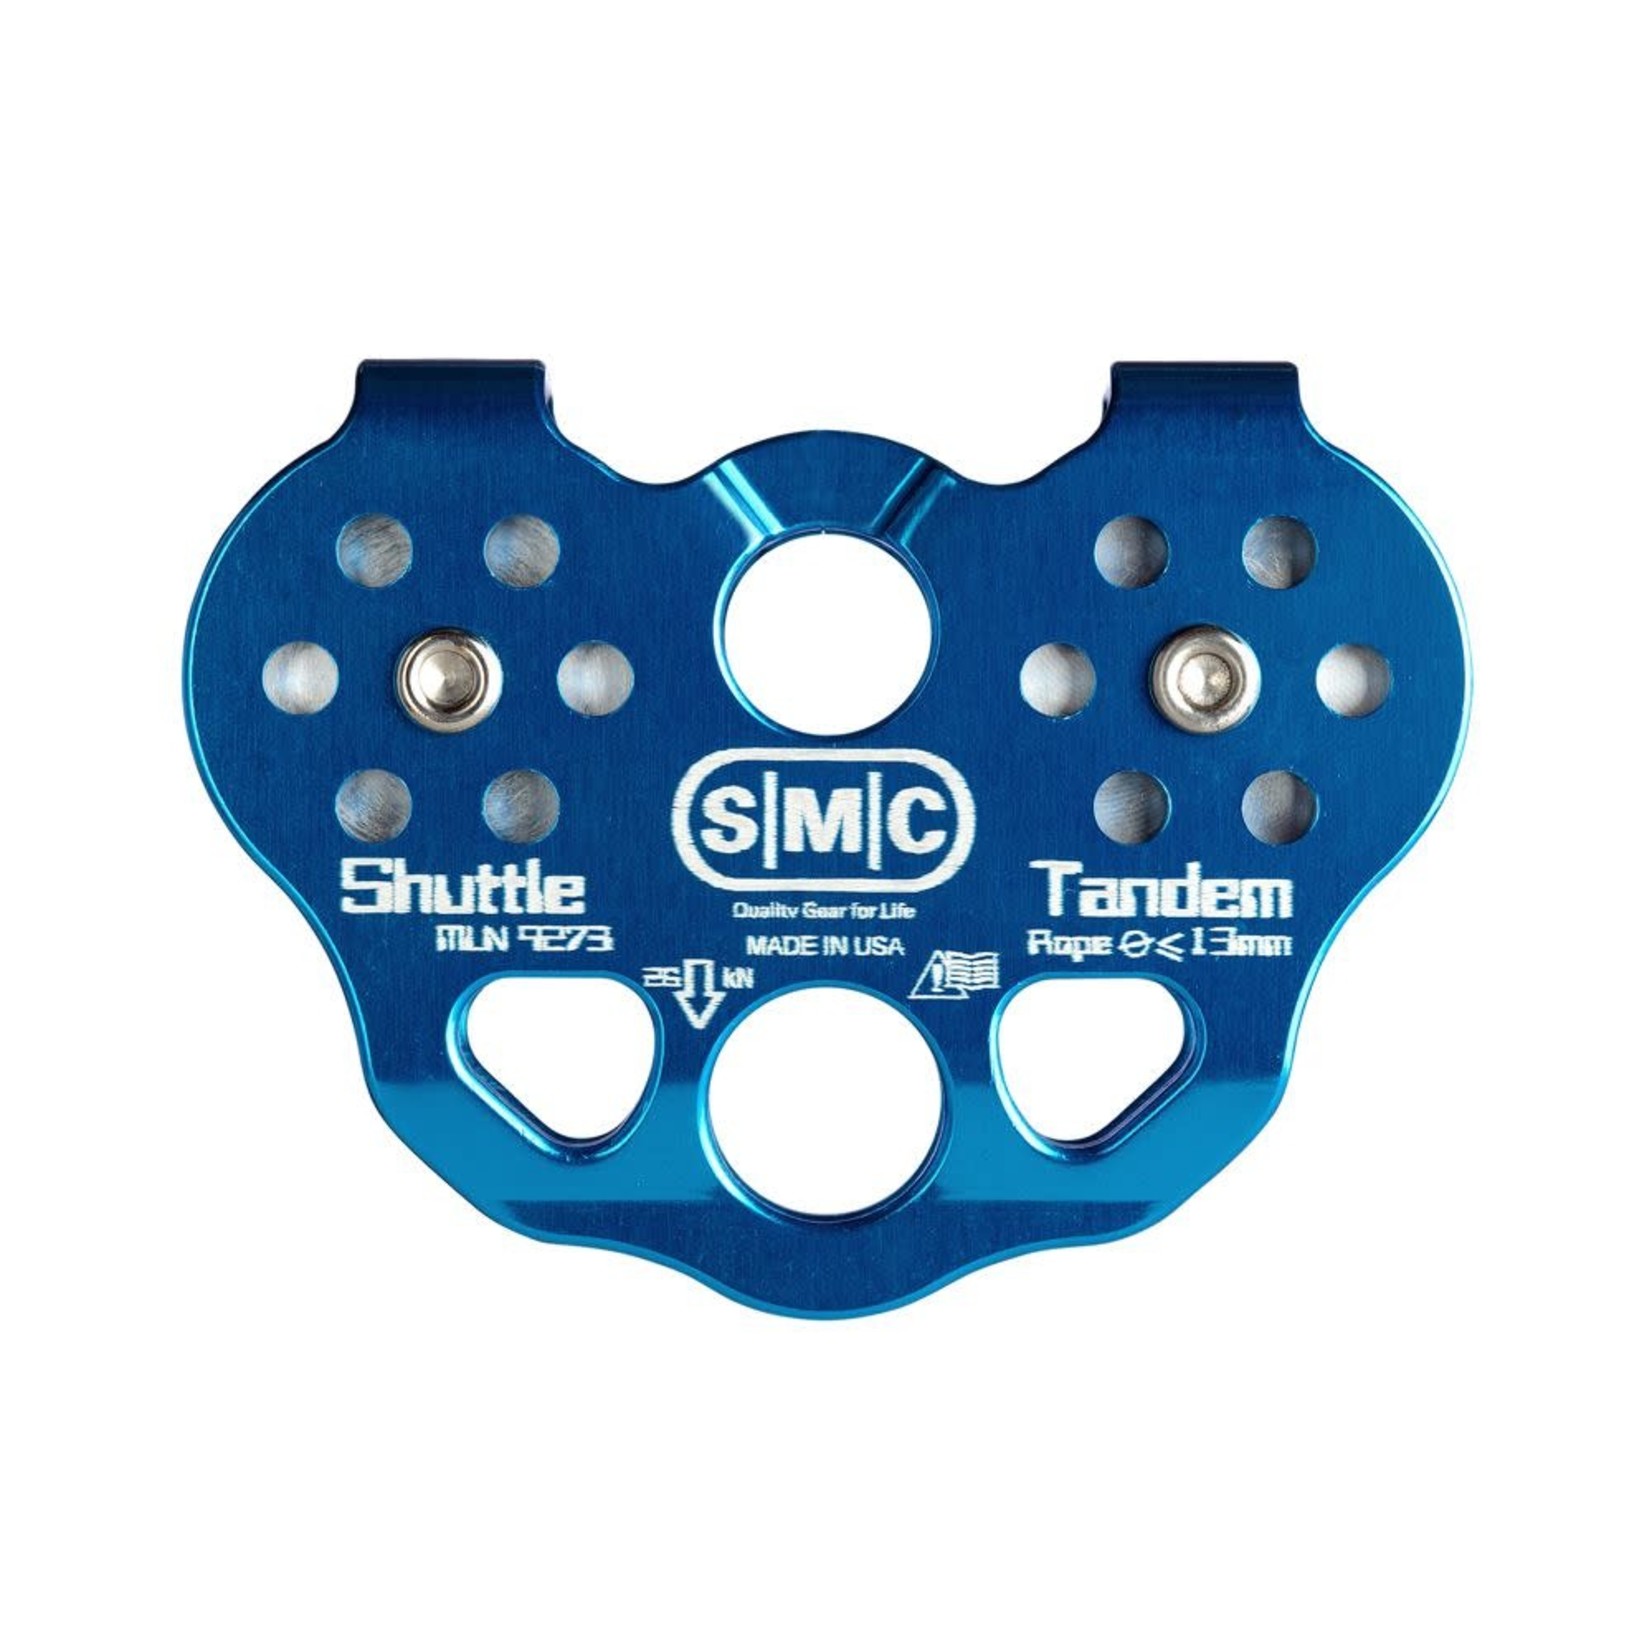 SMC SMC Shuttle Tandem Rope Pulley - Closeout